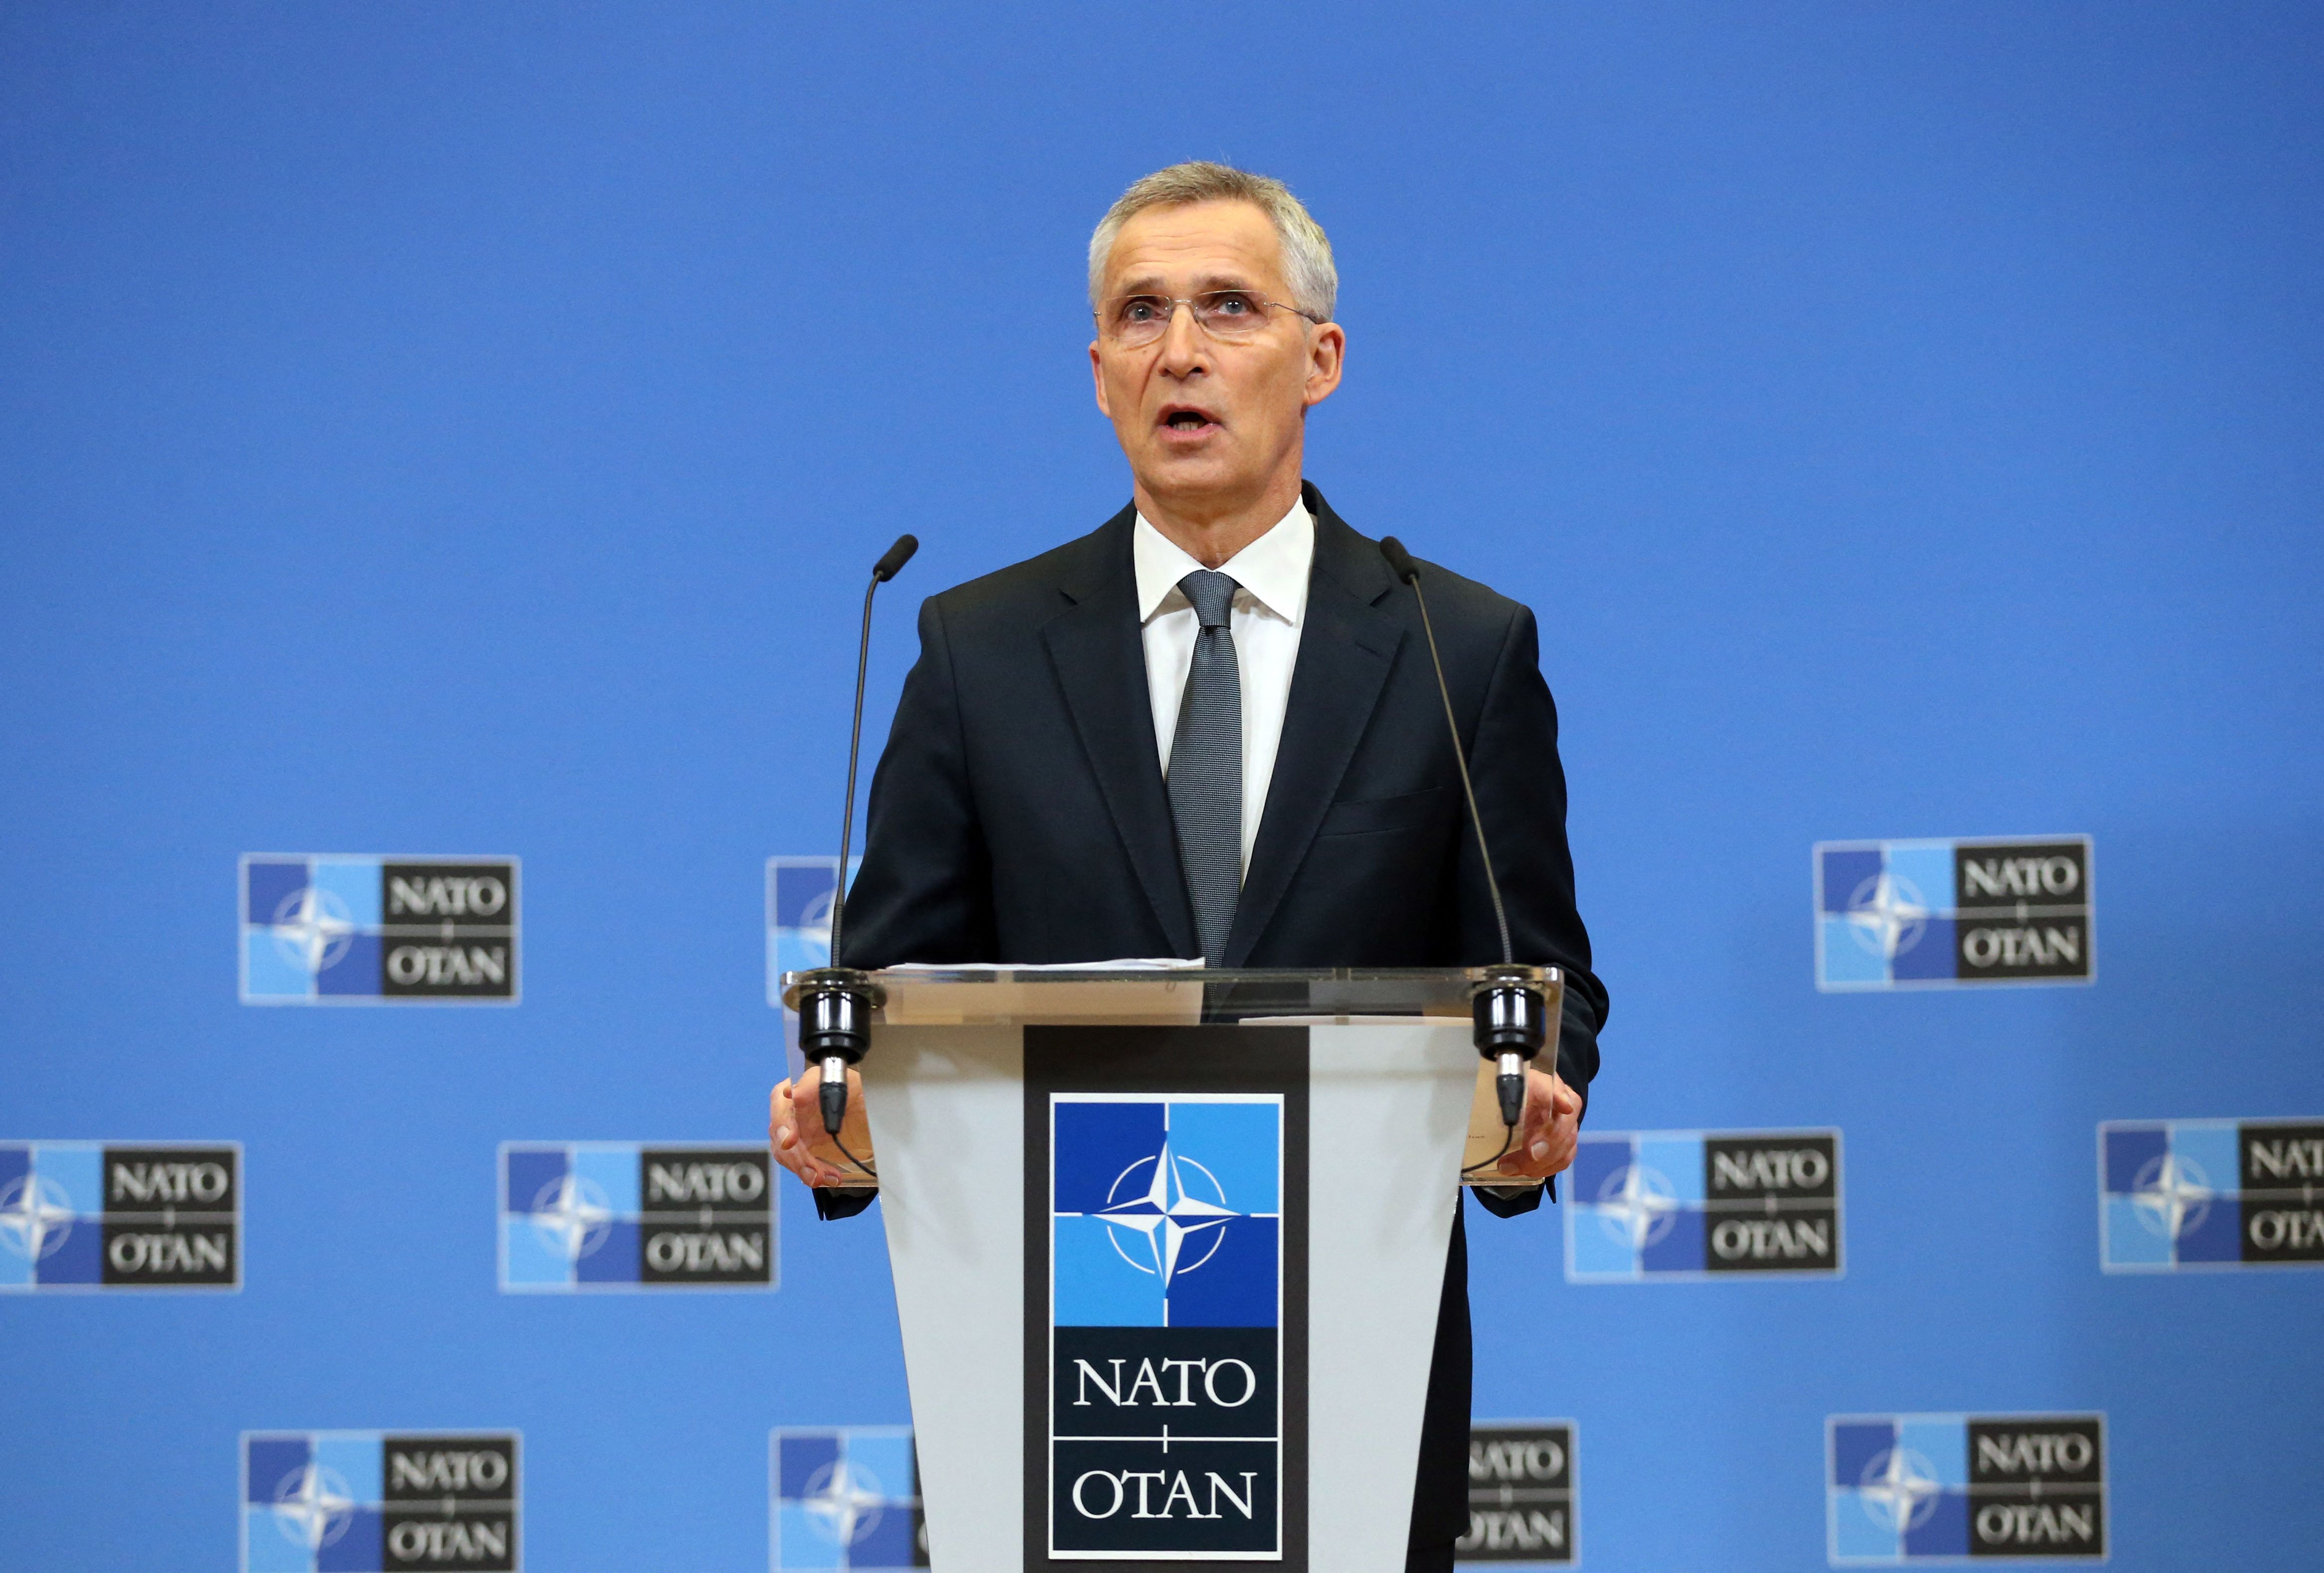 NATO General Secretary Jens Stoltenberg speaks during a press conference at the NATO headquarters in Brussels, Belgium, on April 5.